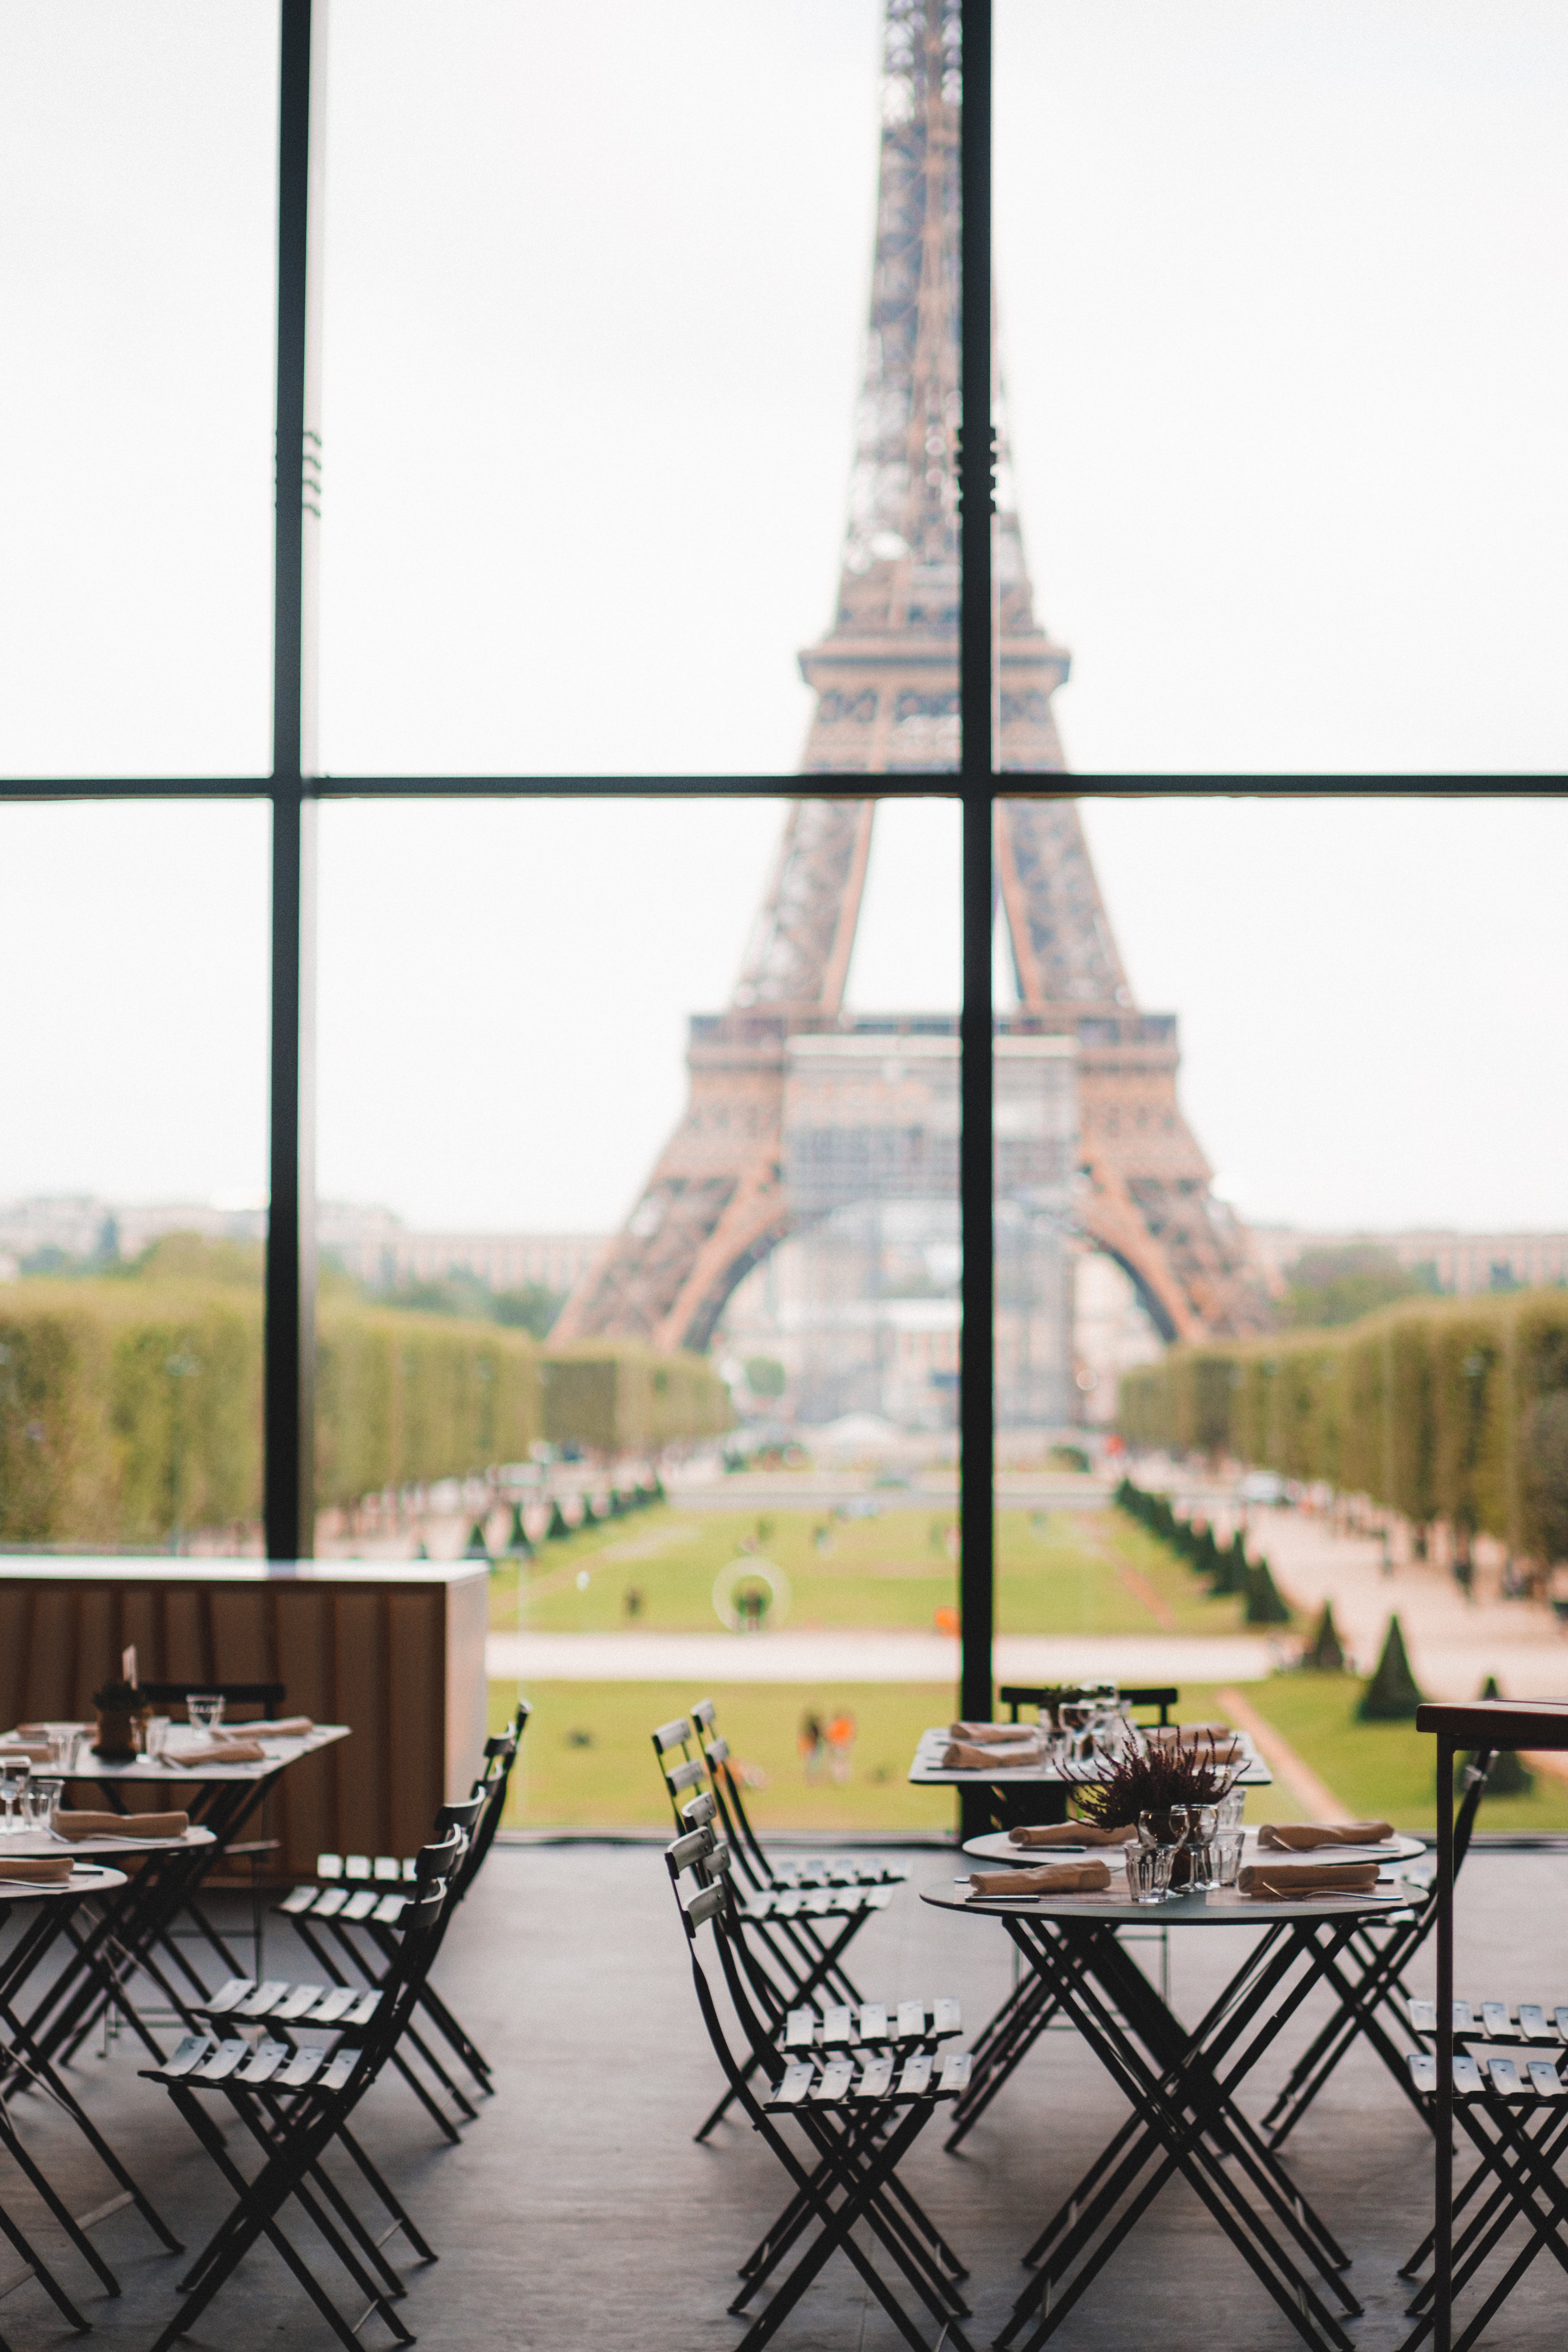 850+ Eiffel Tower Restaurant Stock Photos, Pictures & Royalty-Free